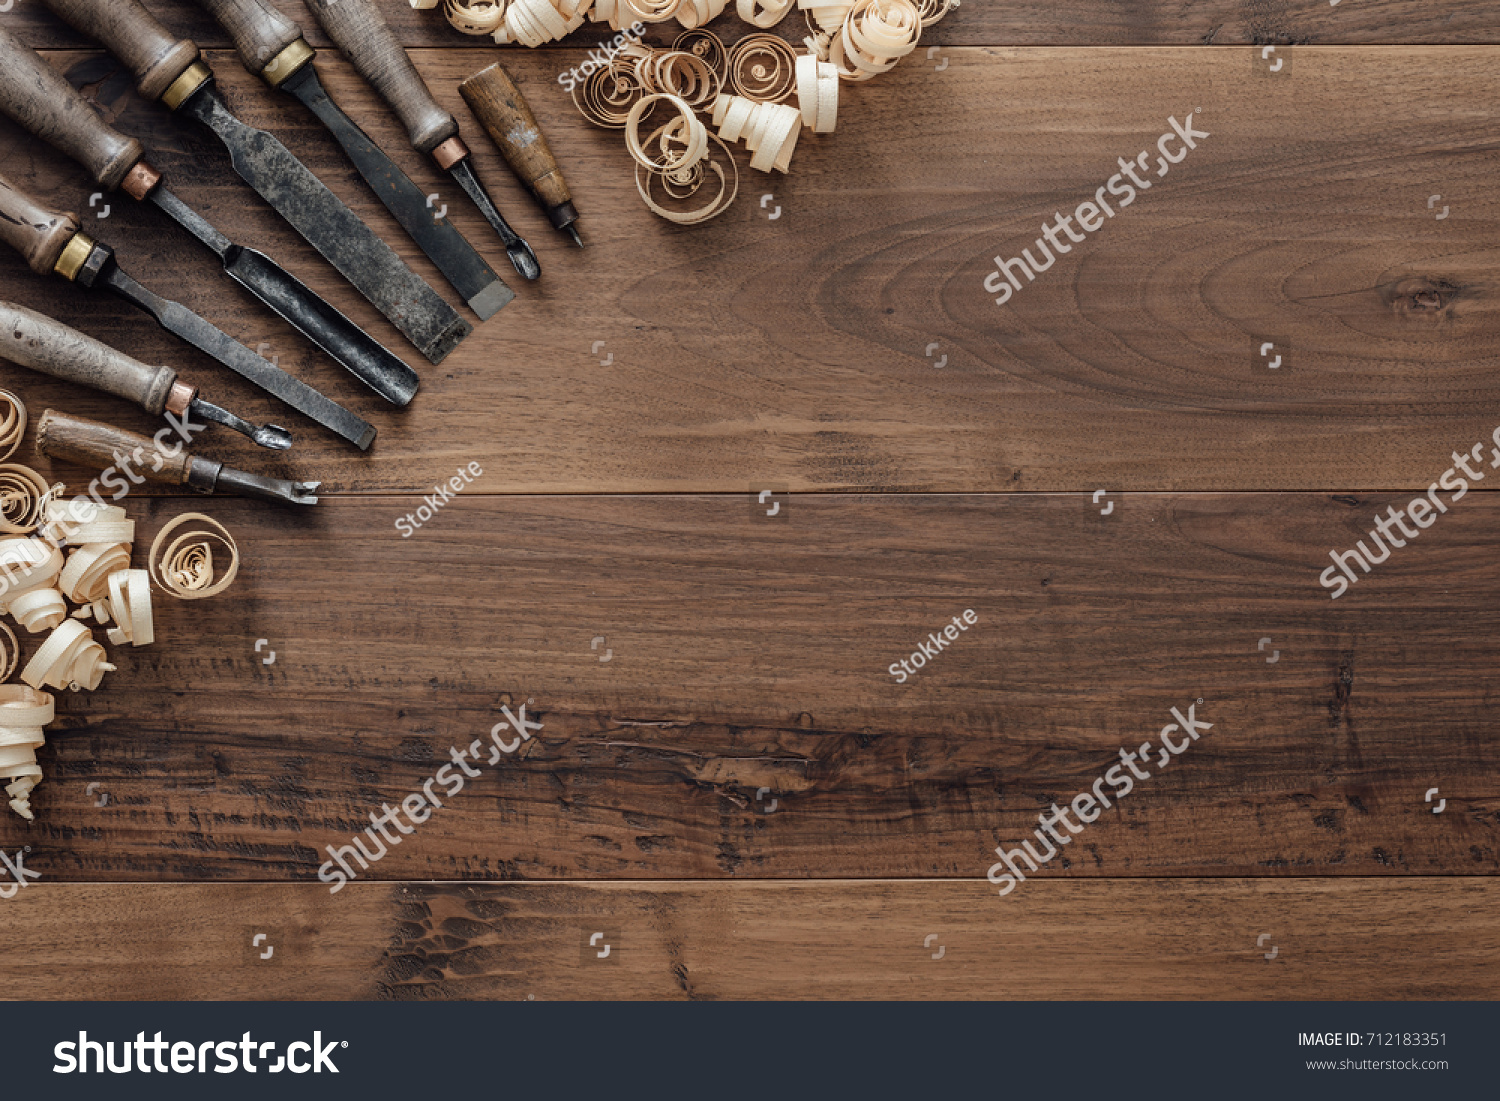 Old carpentry tools on a workbench and blank copyspace: woodworking, craftsmanship and handwork concept, flat lay #712183351